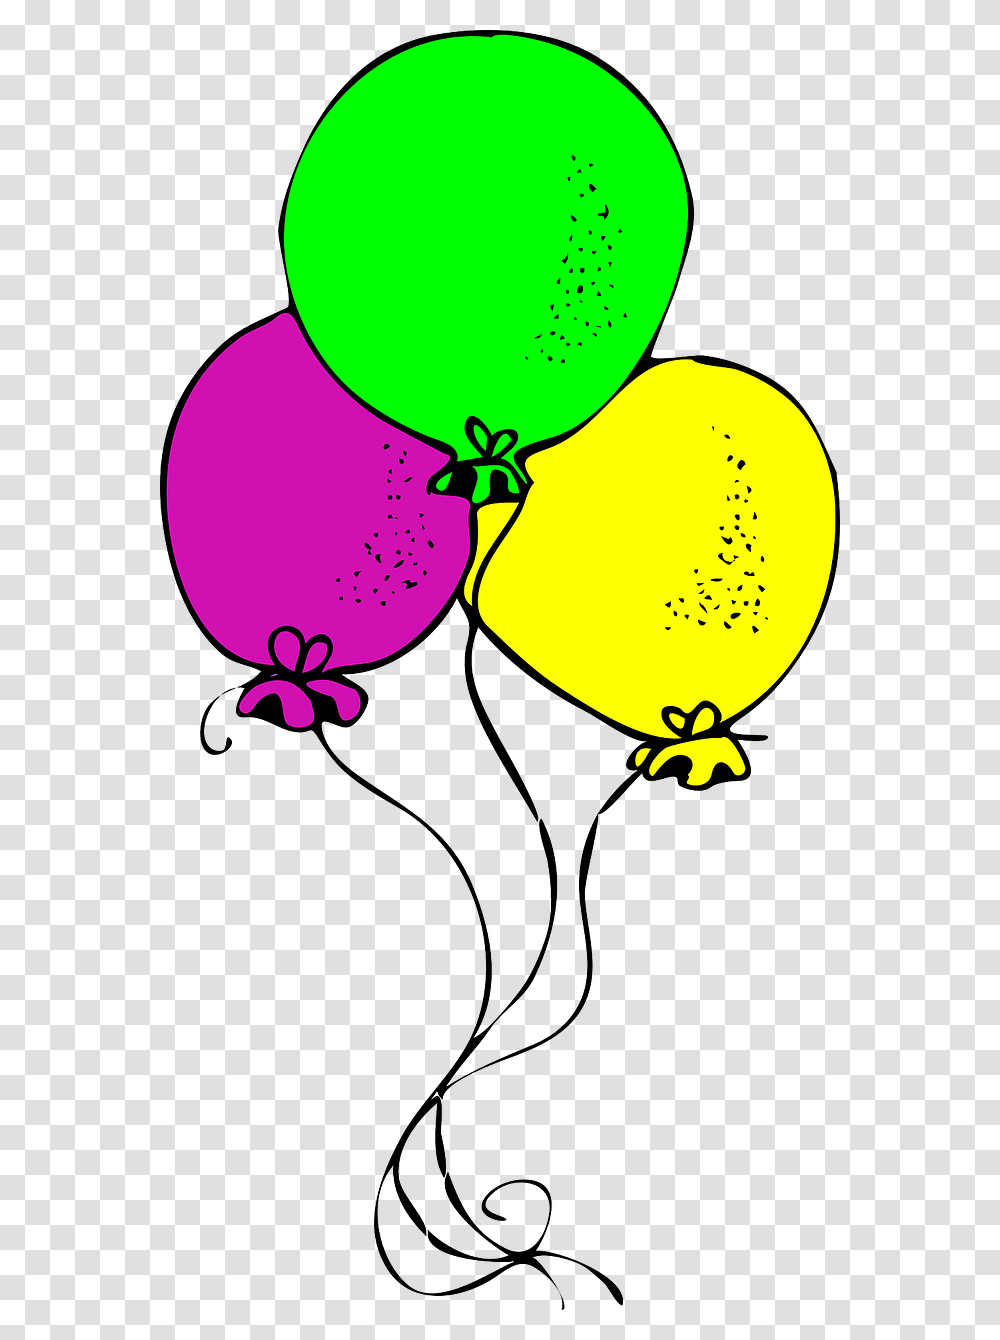 Party Banner 6 Free Balloons Free Champagne Showers Palloncini Clip Art Transparent Png